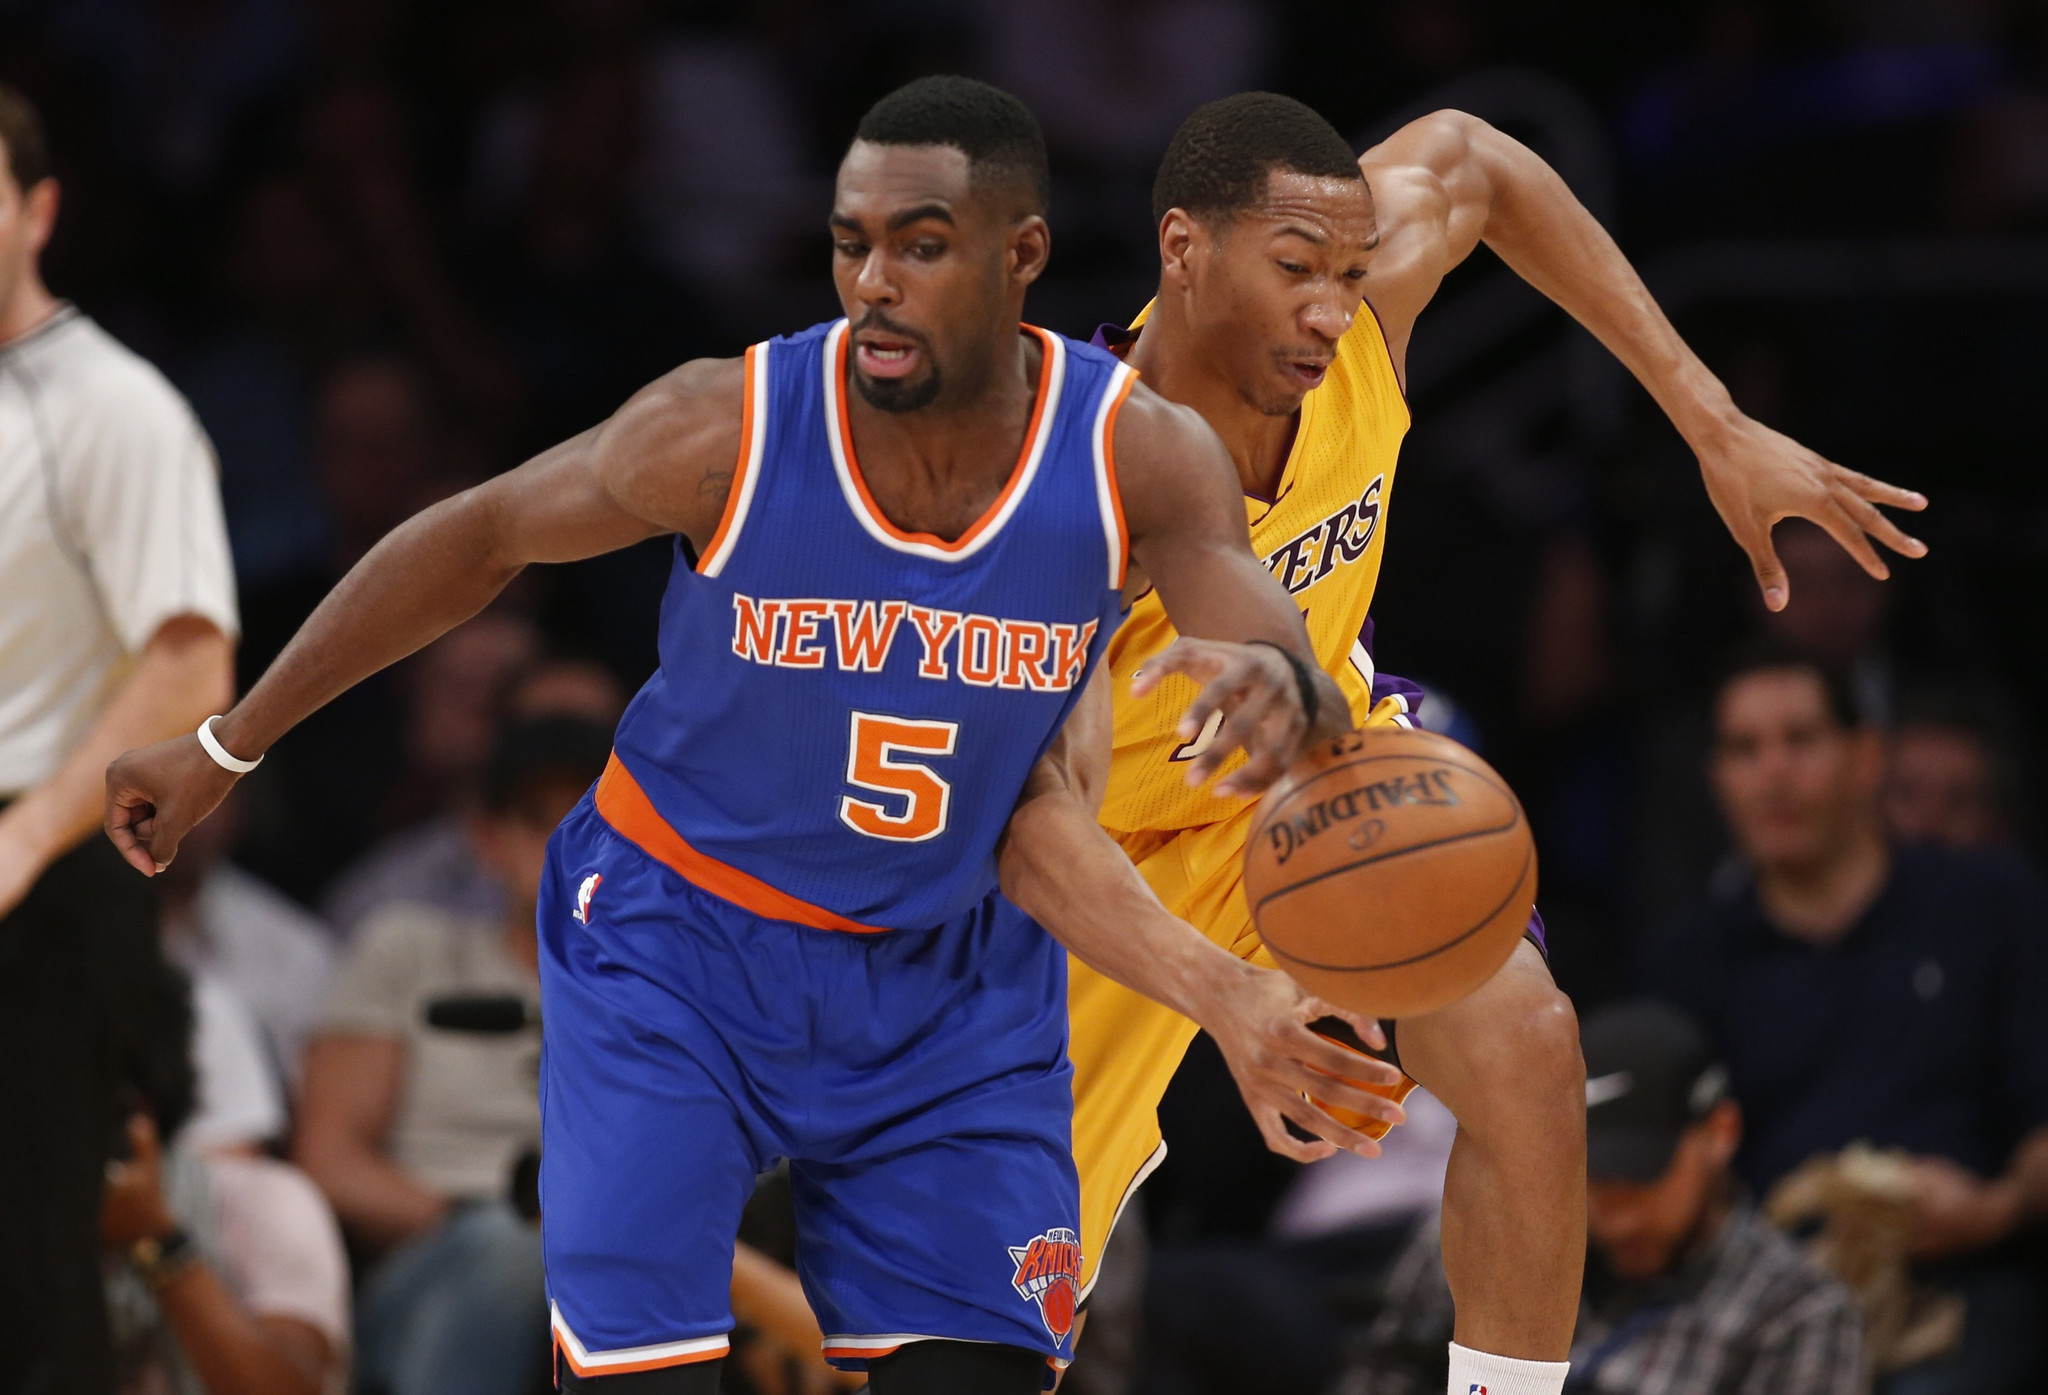 Lakers' late rally falls short in 101-94 loss to the Knicks - LA Times